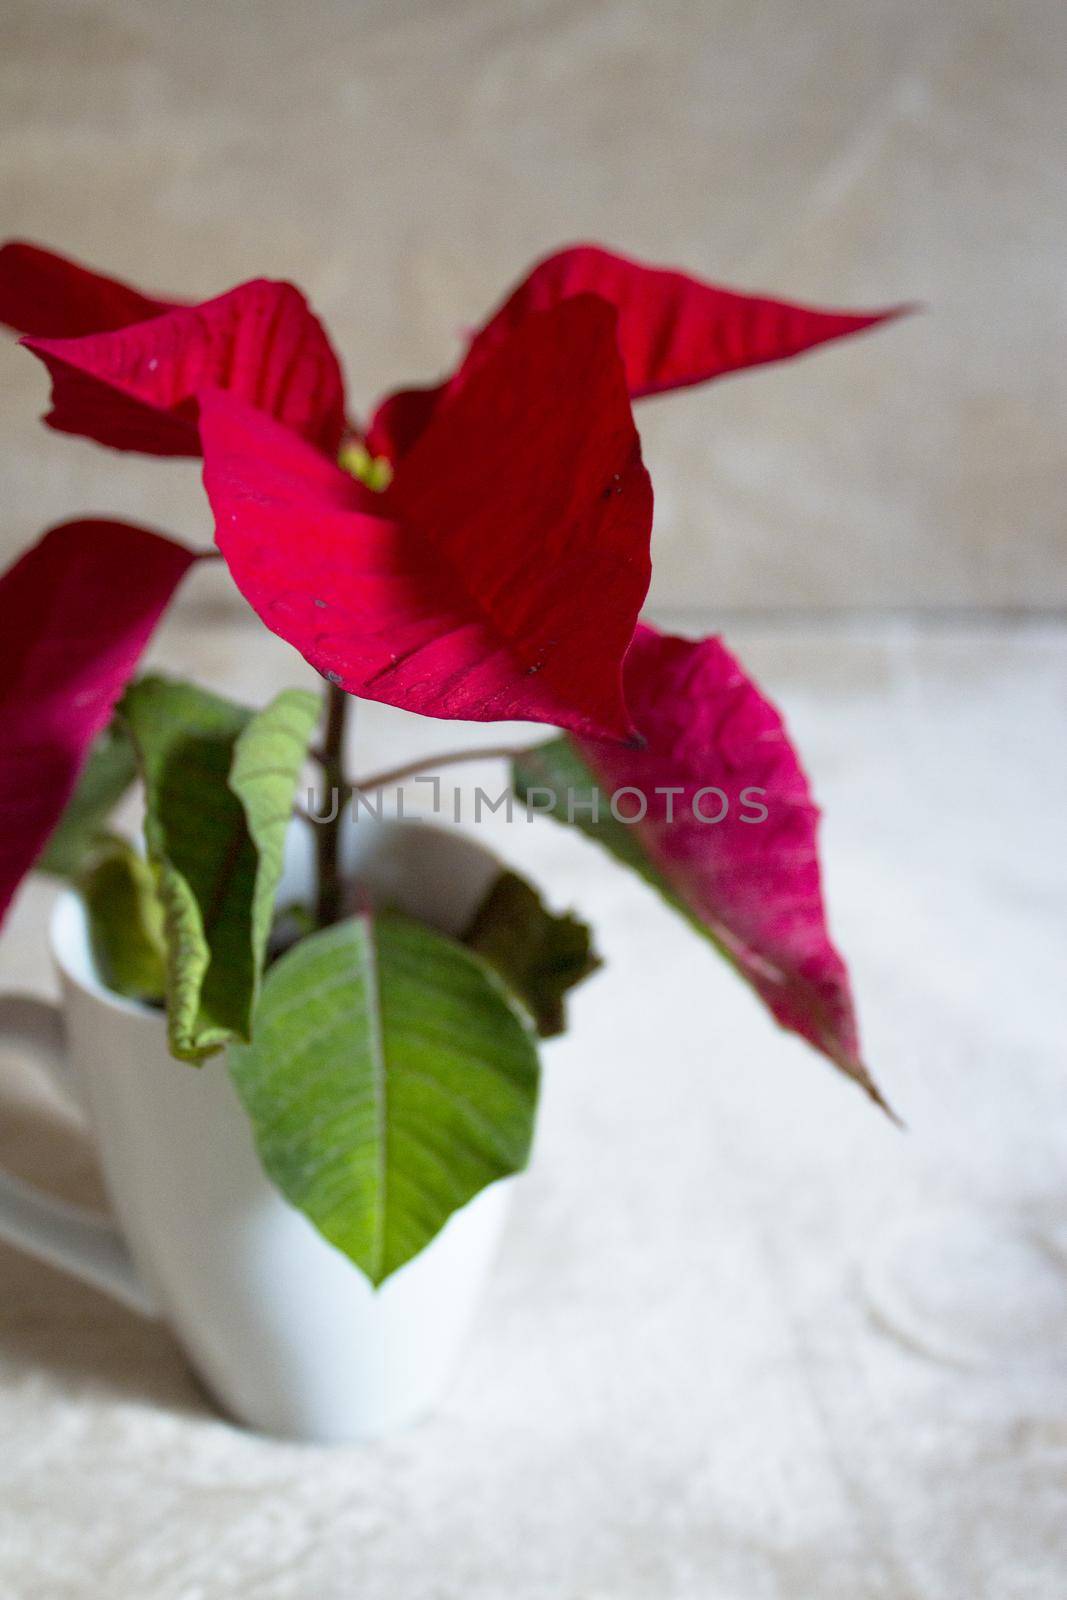 Poinsettia in red. No people. Copy space